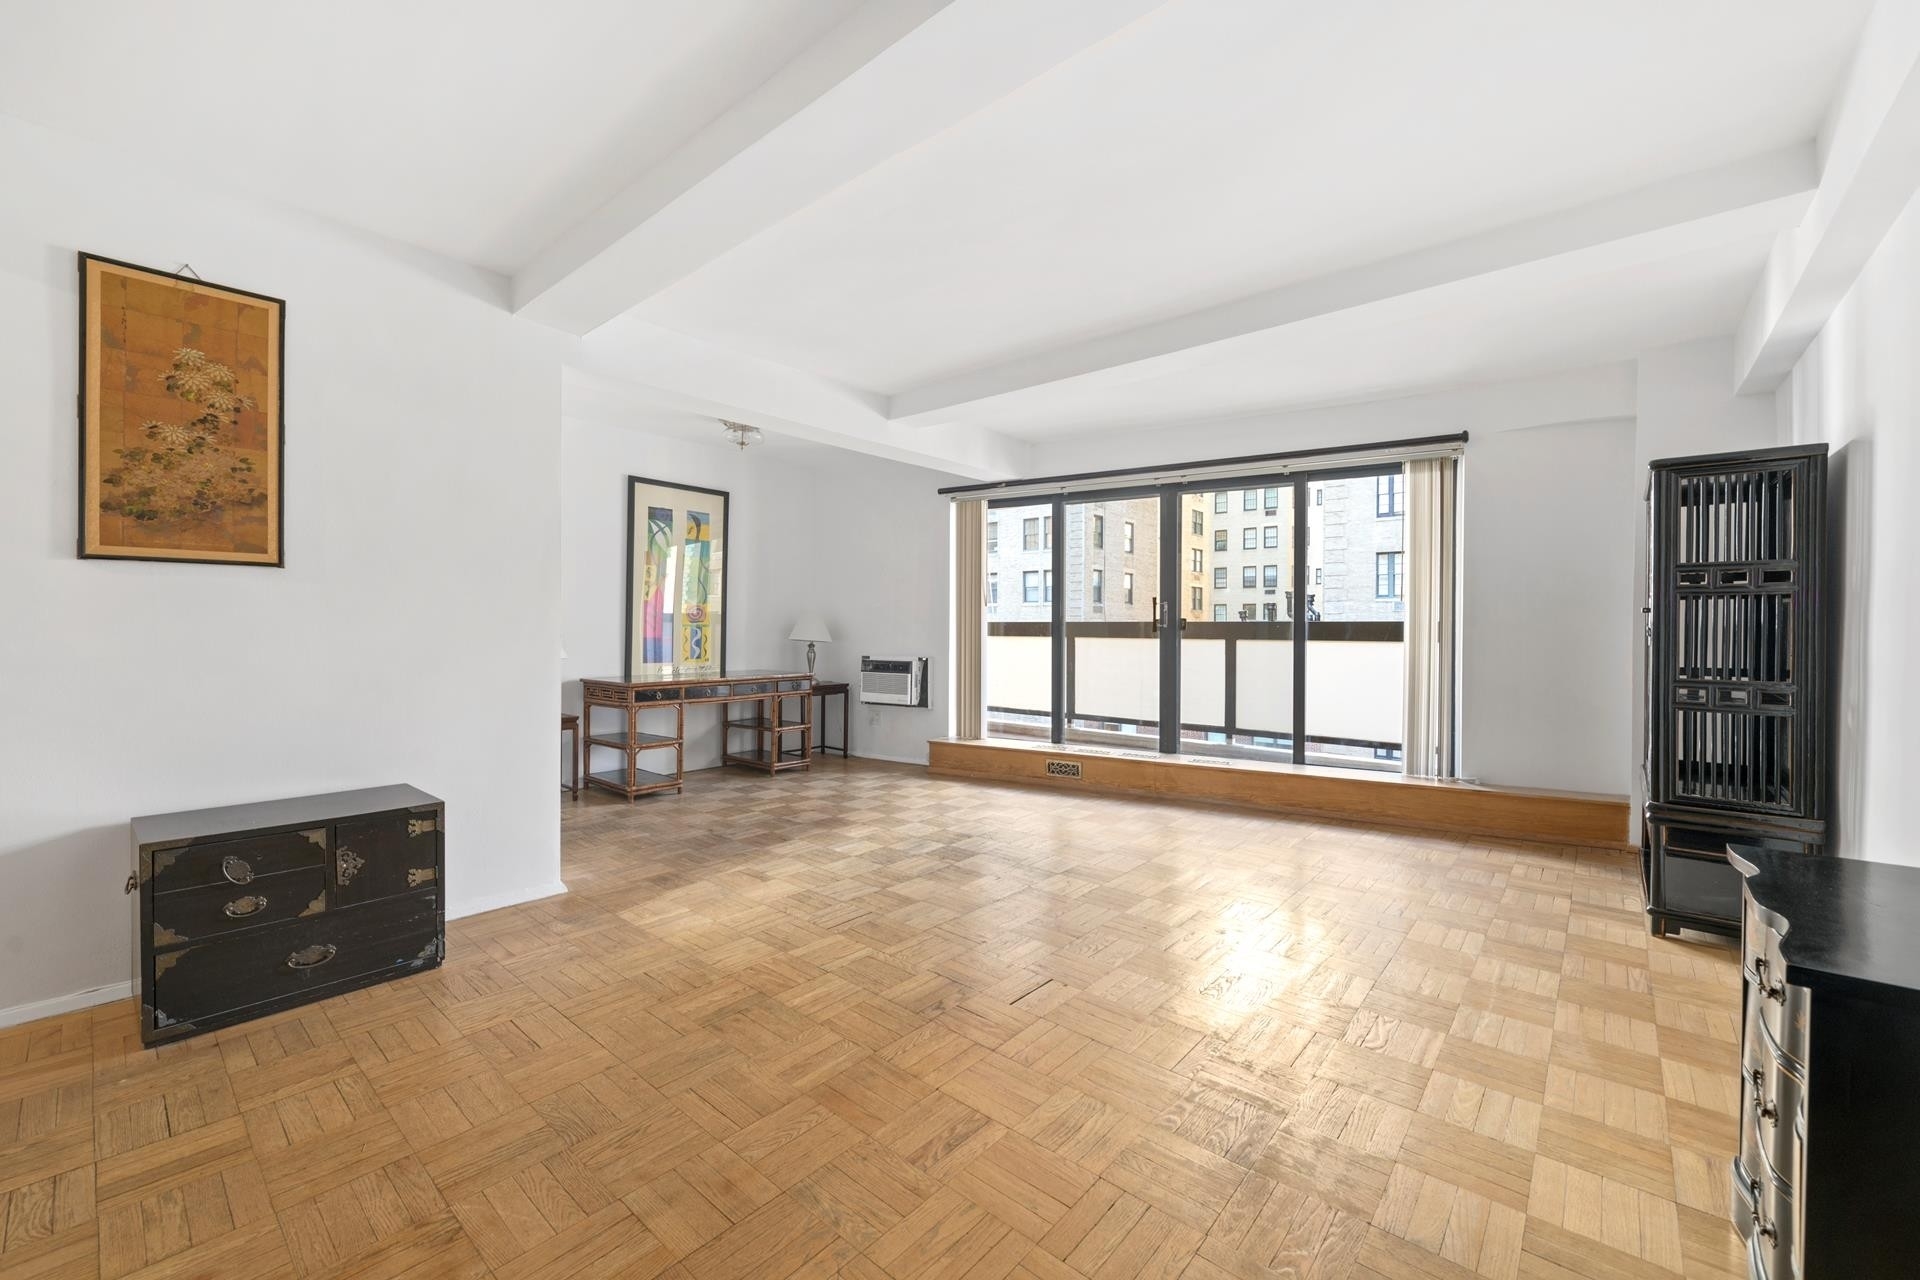 Co-op Properties for Sale at 750 PARK AVE , 8E Lenox Hill, New York, New York 10021